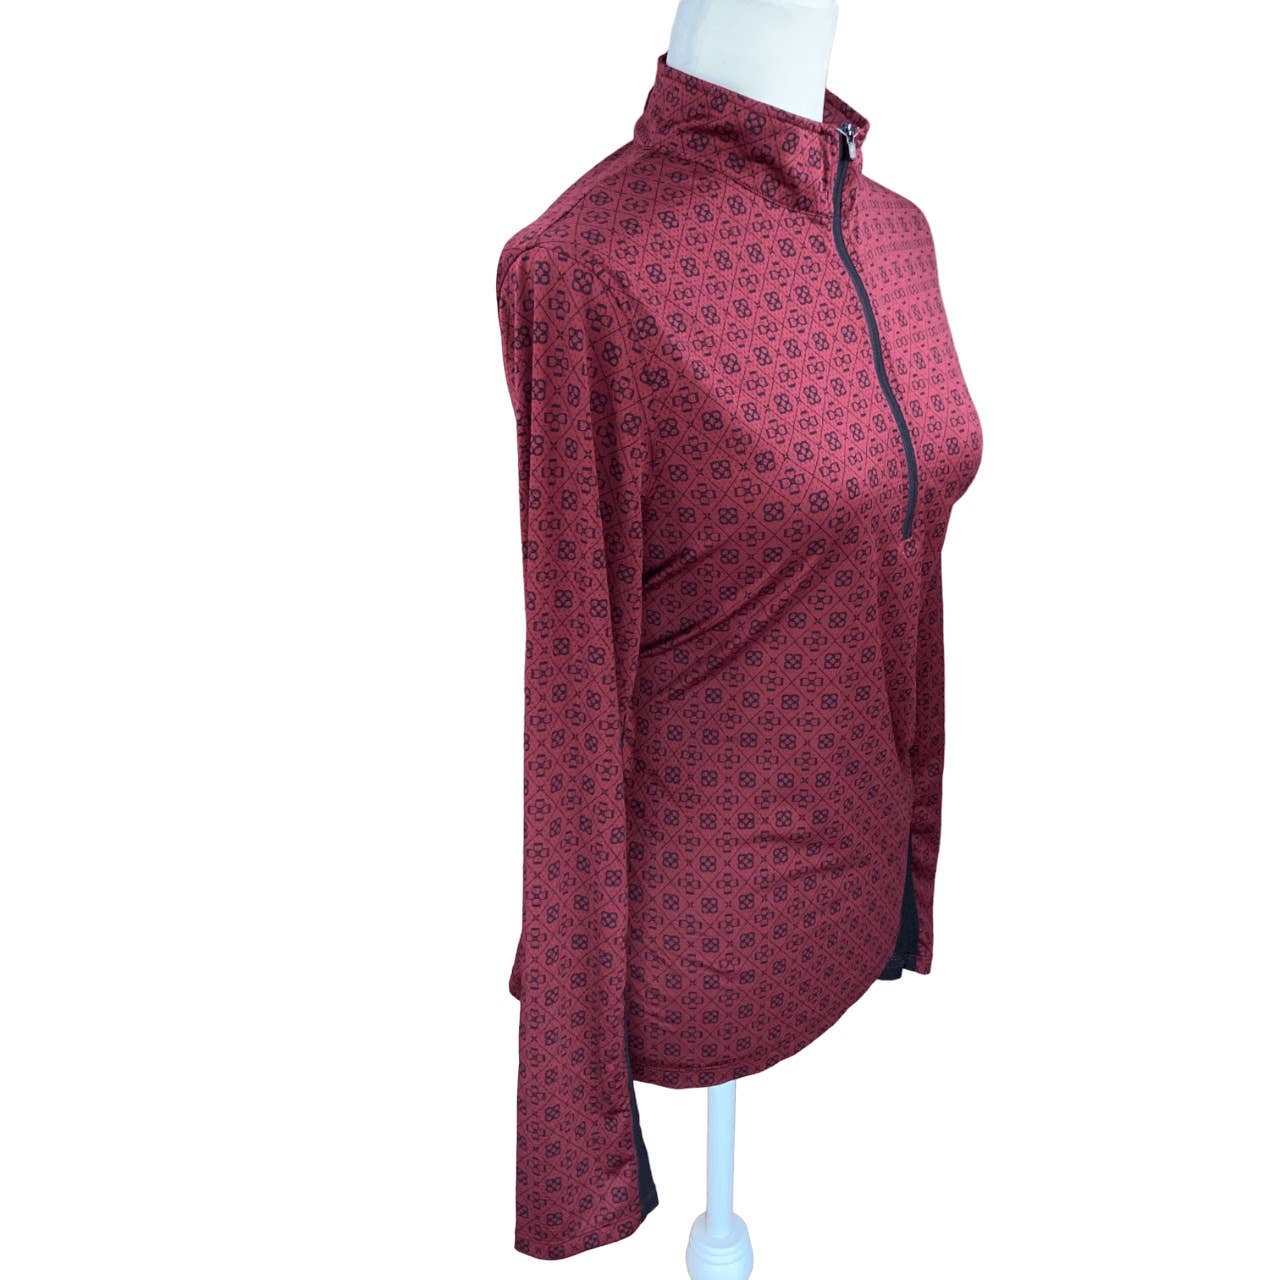 Kerrits Ice Fil Lite Riding Shirt in Red - Woman's Large